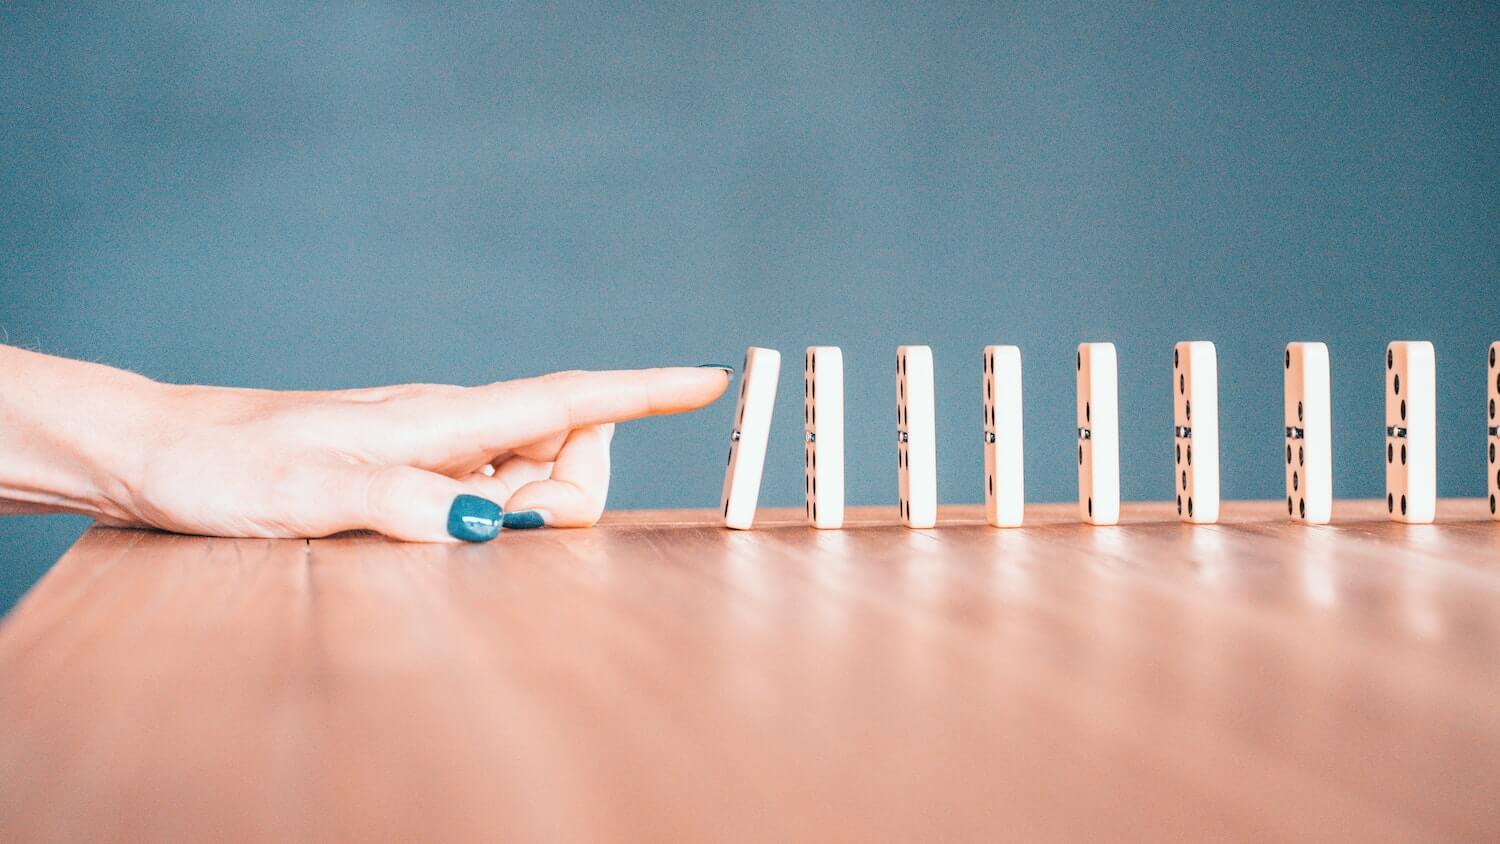 Cloudflare outage? The Domino Effect!